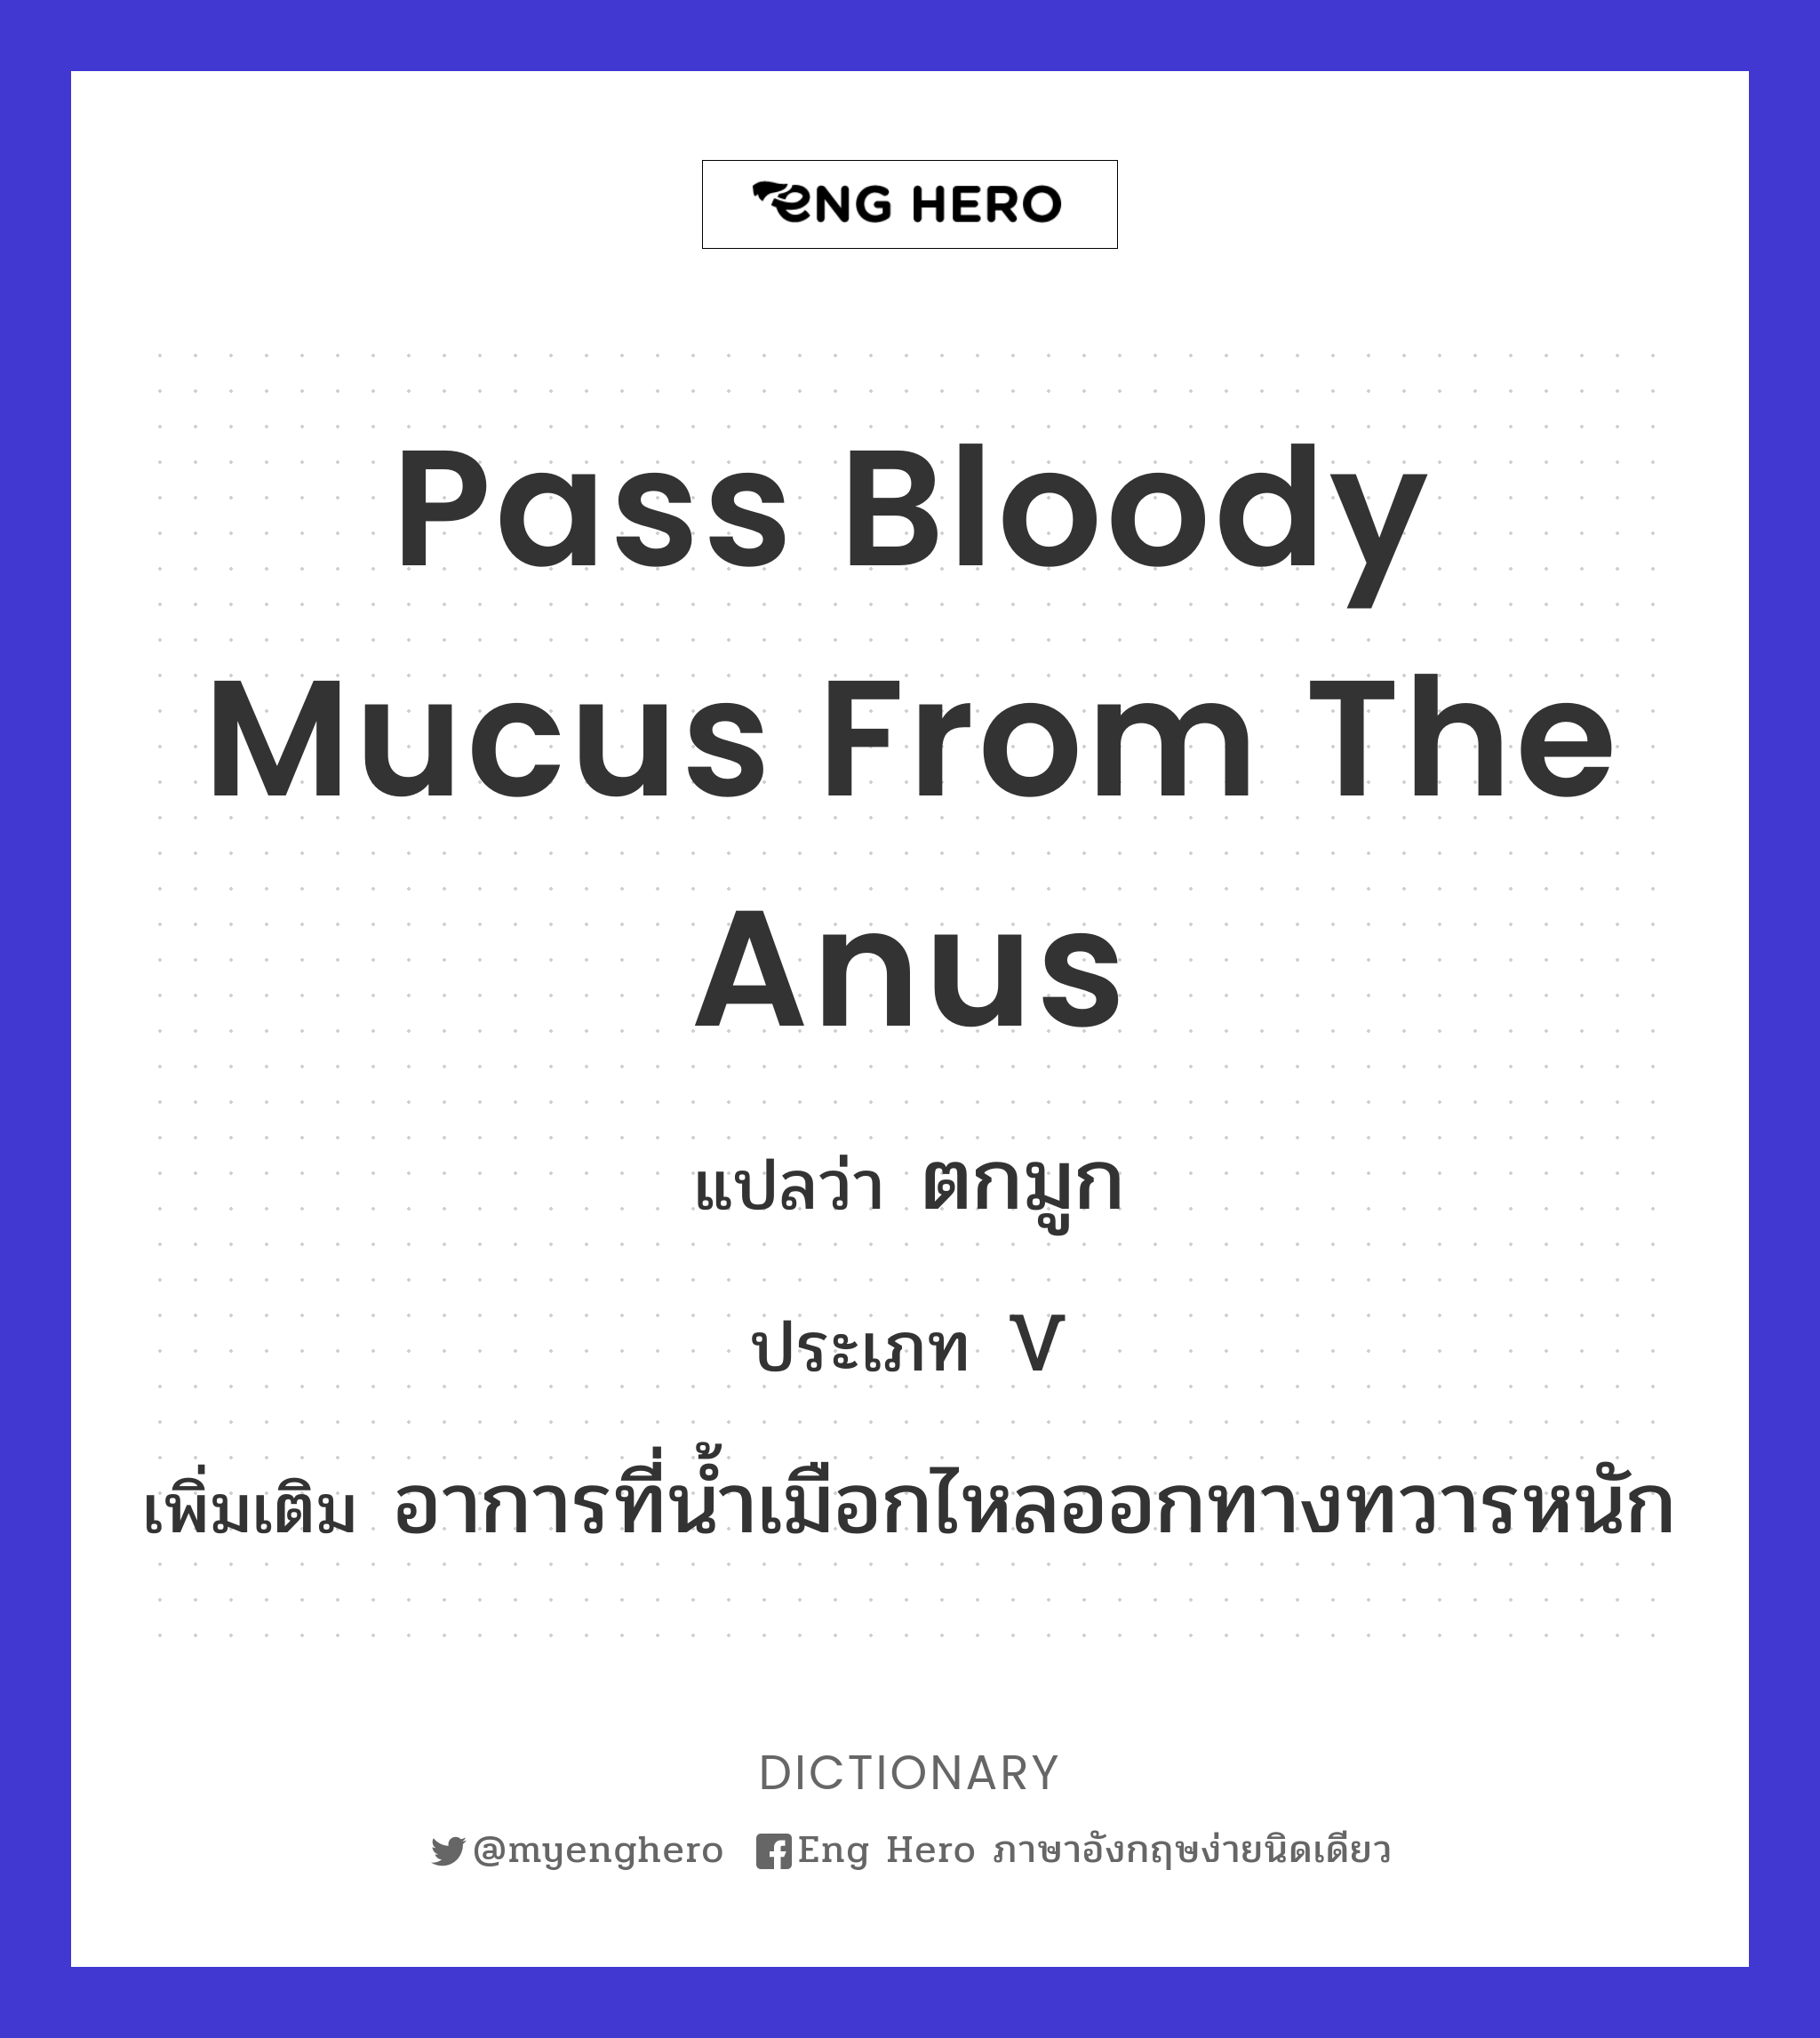 pass bloody mucus from the anus